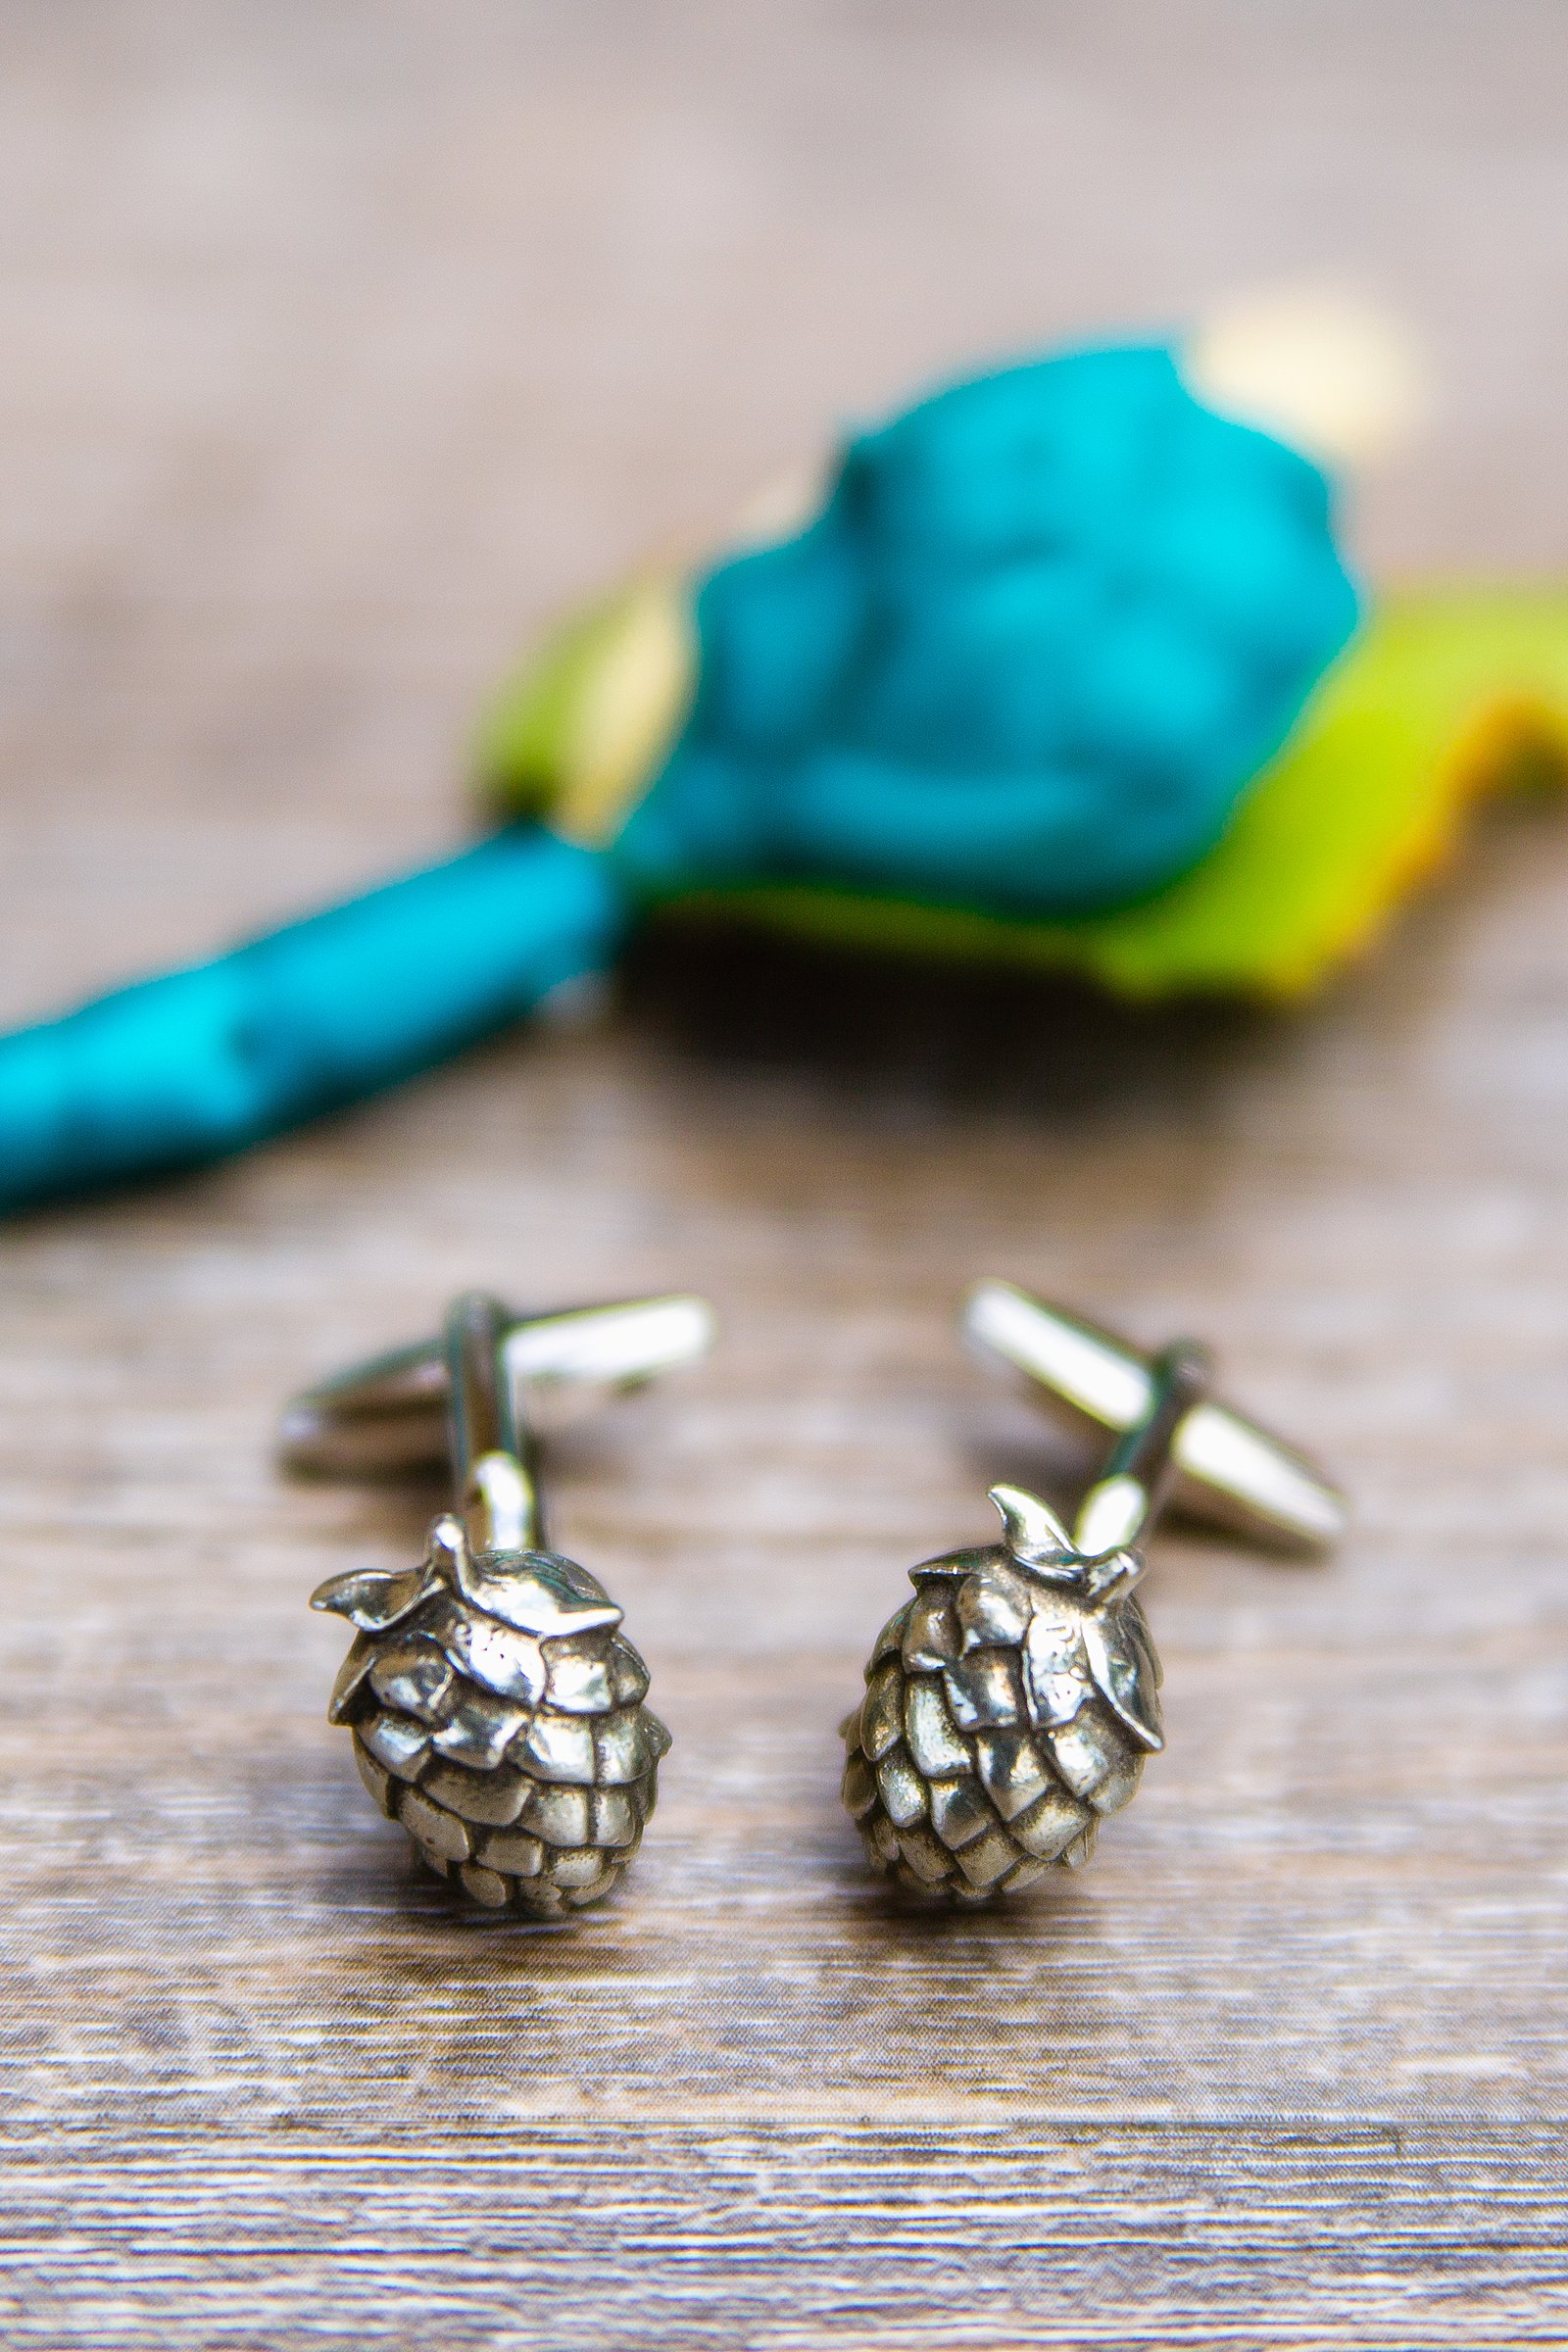 Groom's wedding day details of hops cuff links by PMA Photography.